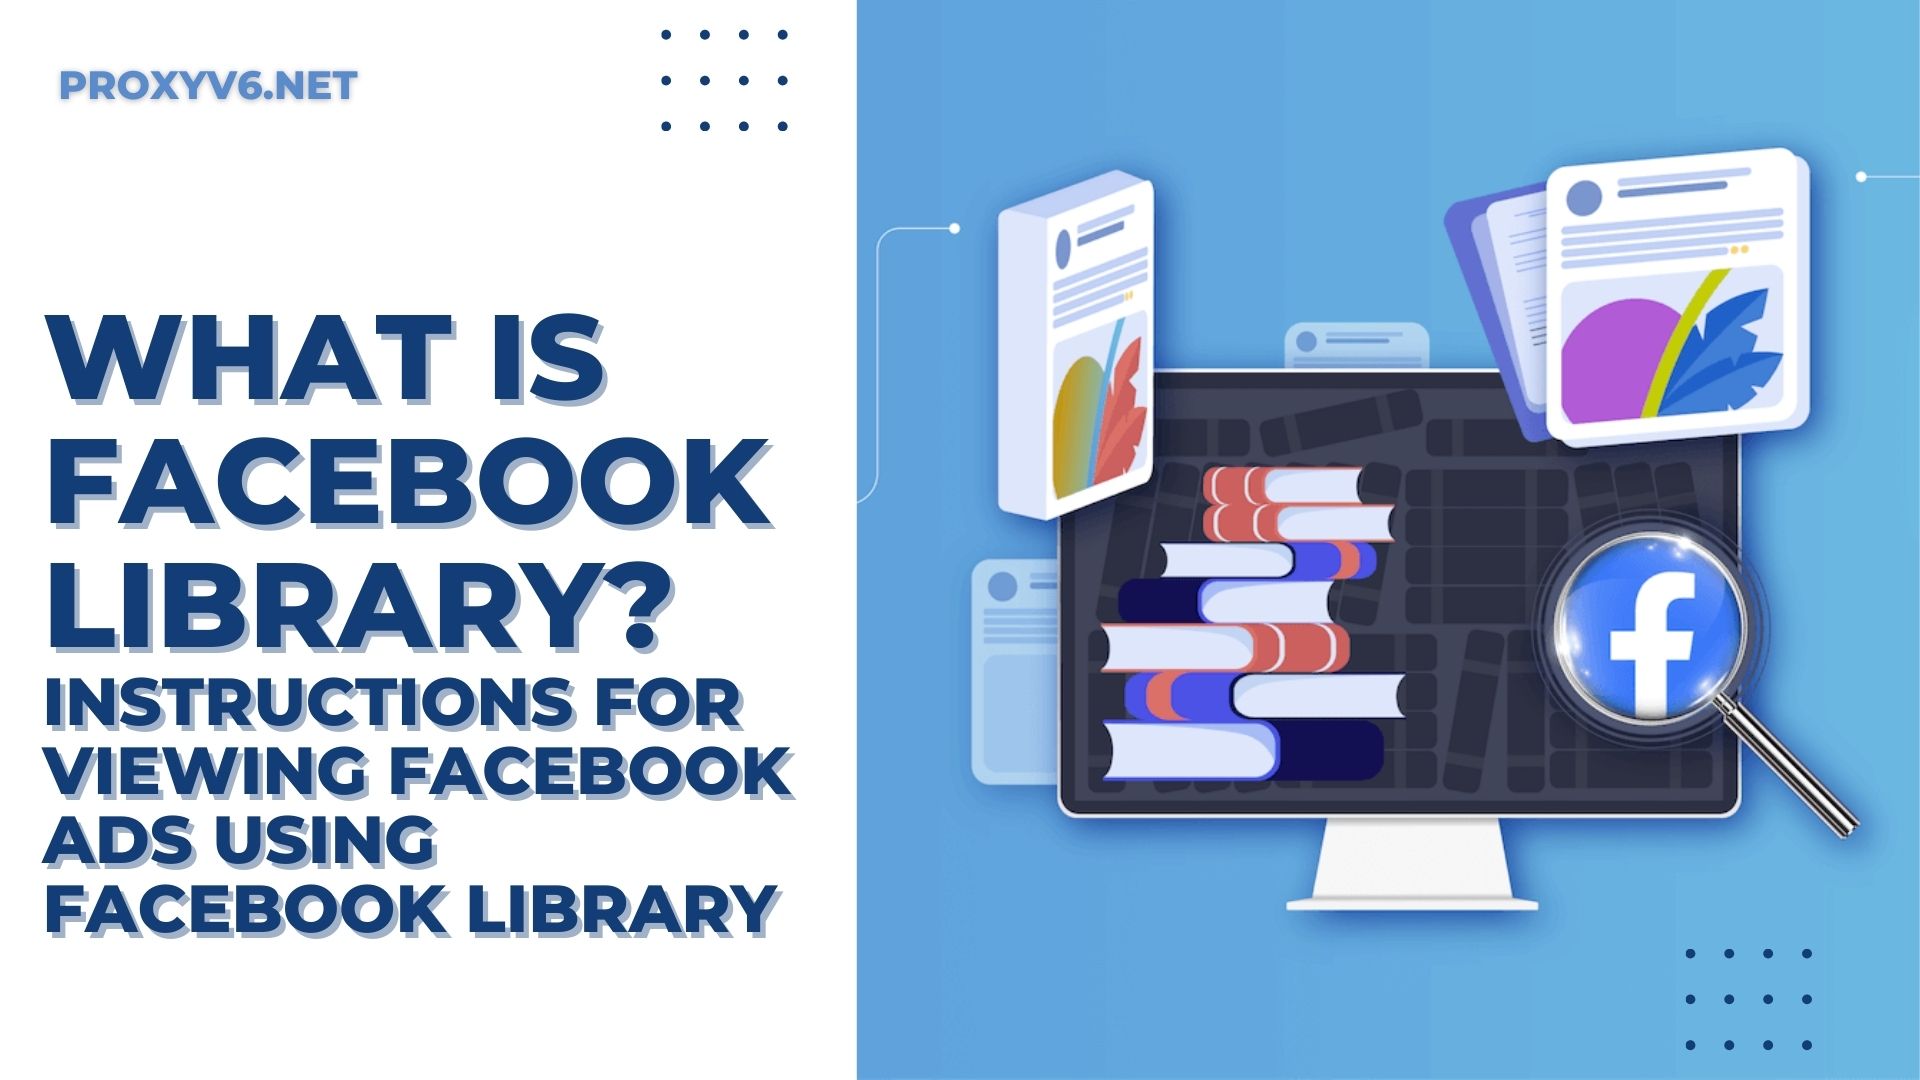 What is Facebook Library? Instructions for viewing Facebook ads using Facebook Library